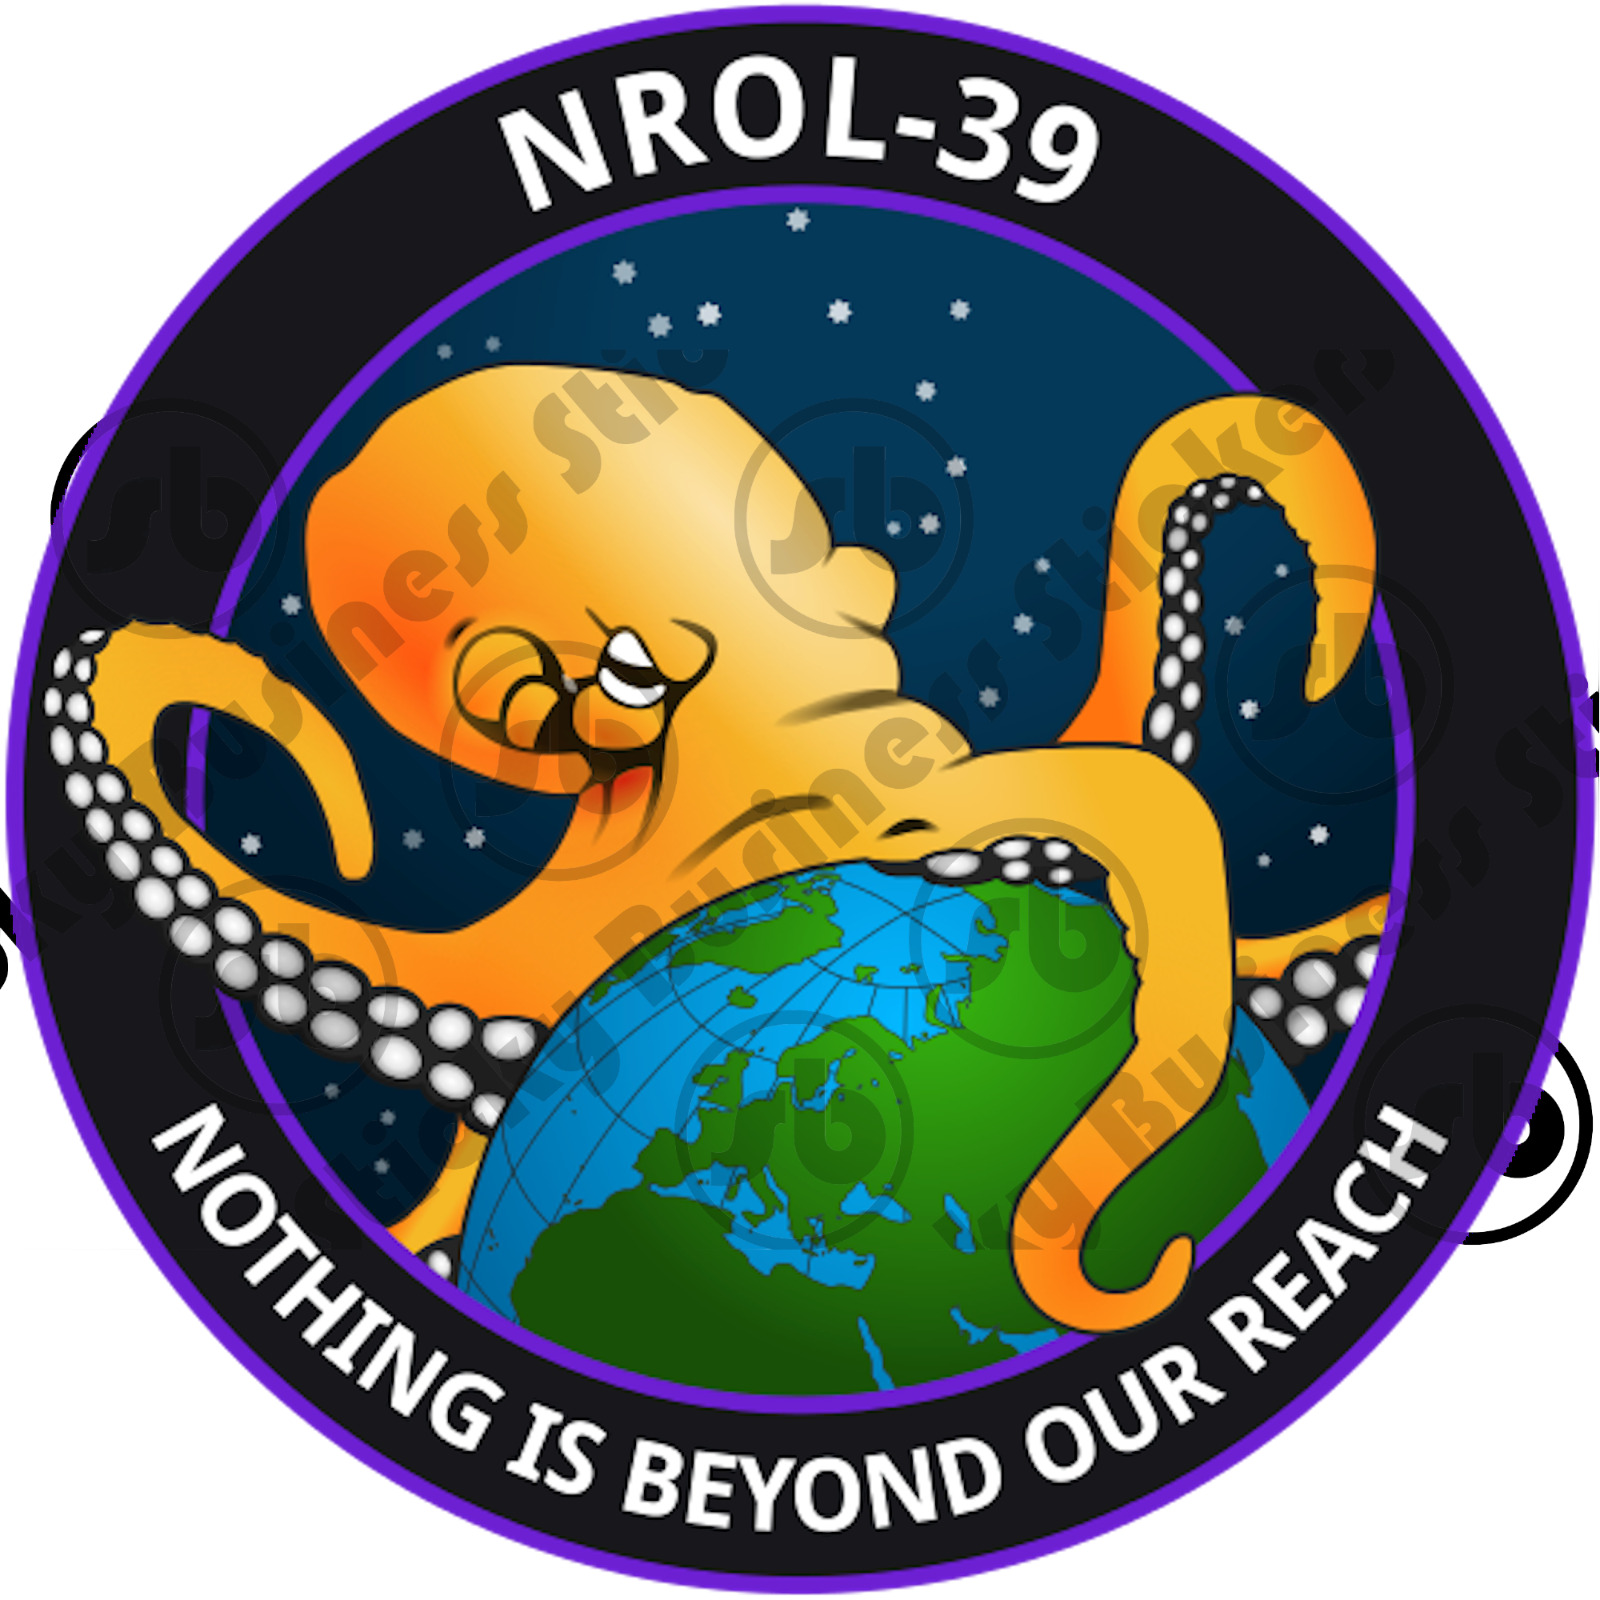 Top Secret NRO Sticker Octopus Nothing Is Beyond Our Reach CIA NSA SpaceX NASA